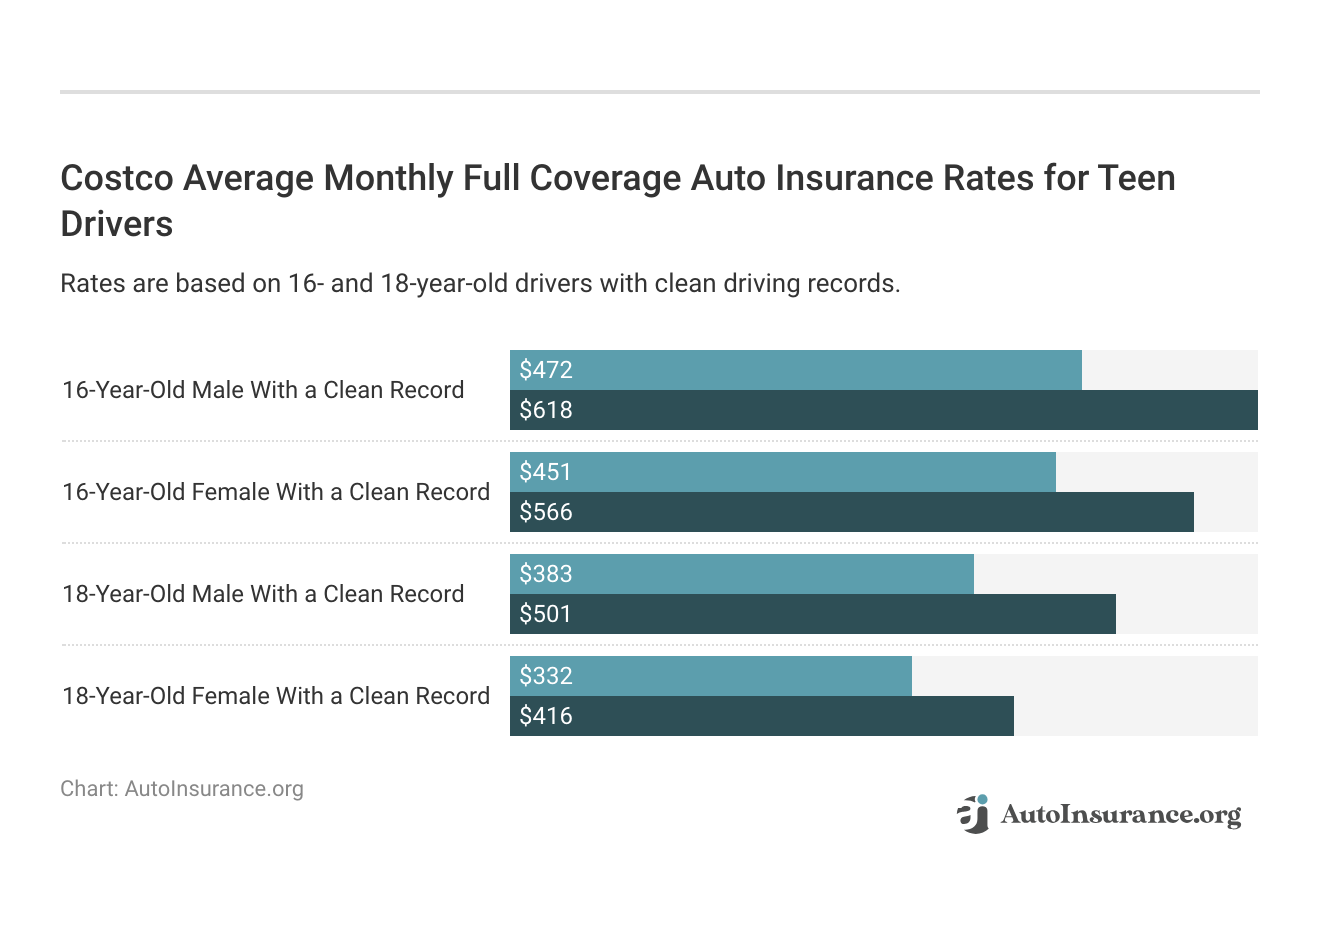 <h3>Costco Average Monthly Full Coverage Auto Insurance Rates for Teen Drivers</h3>